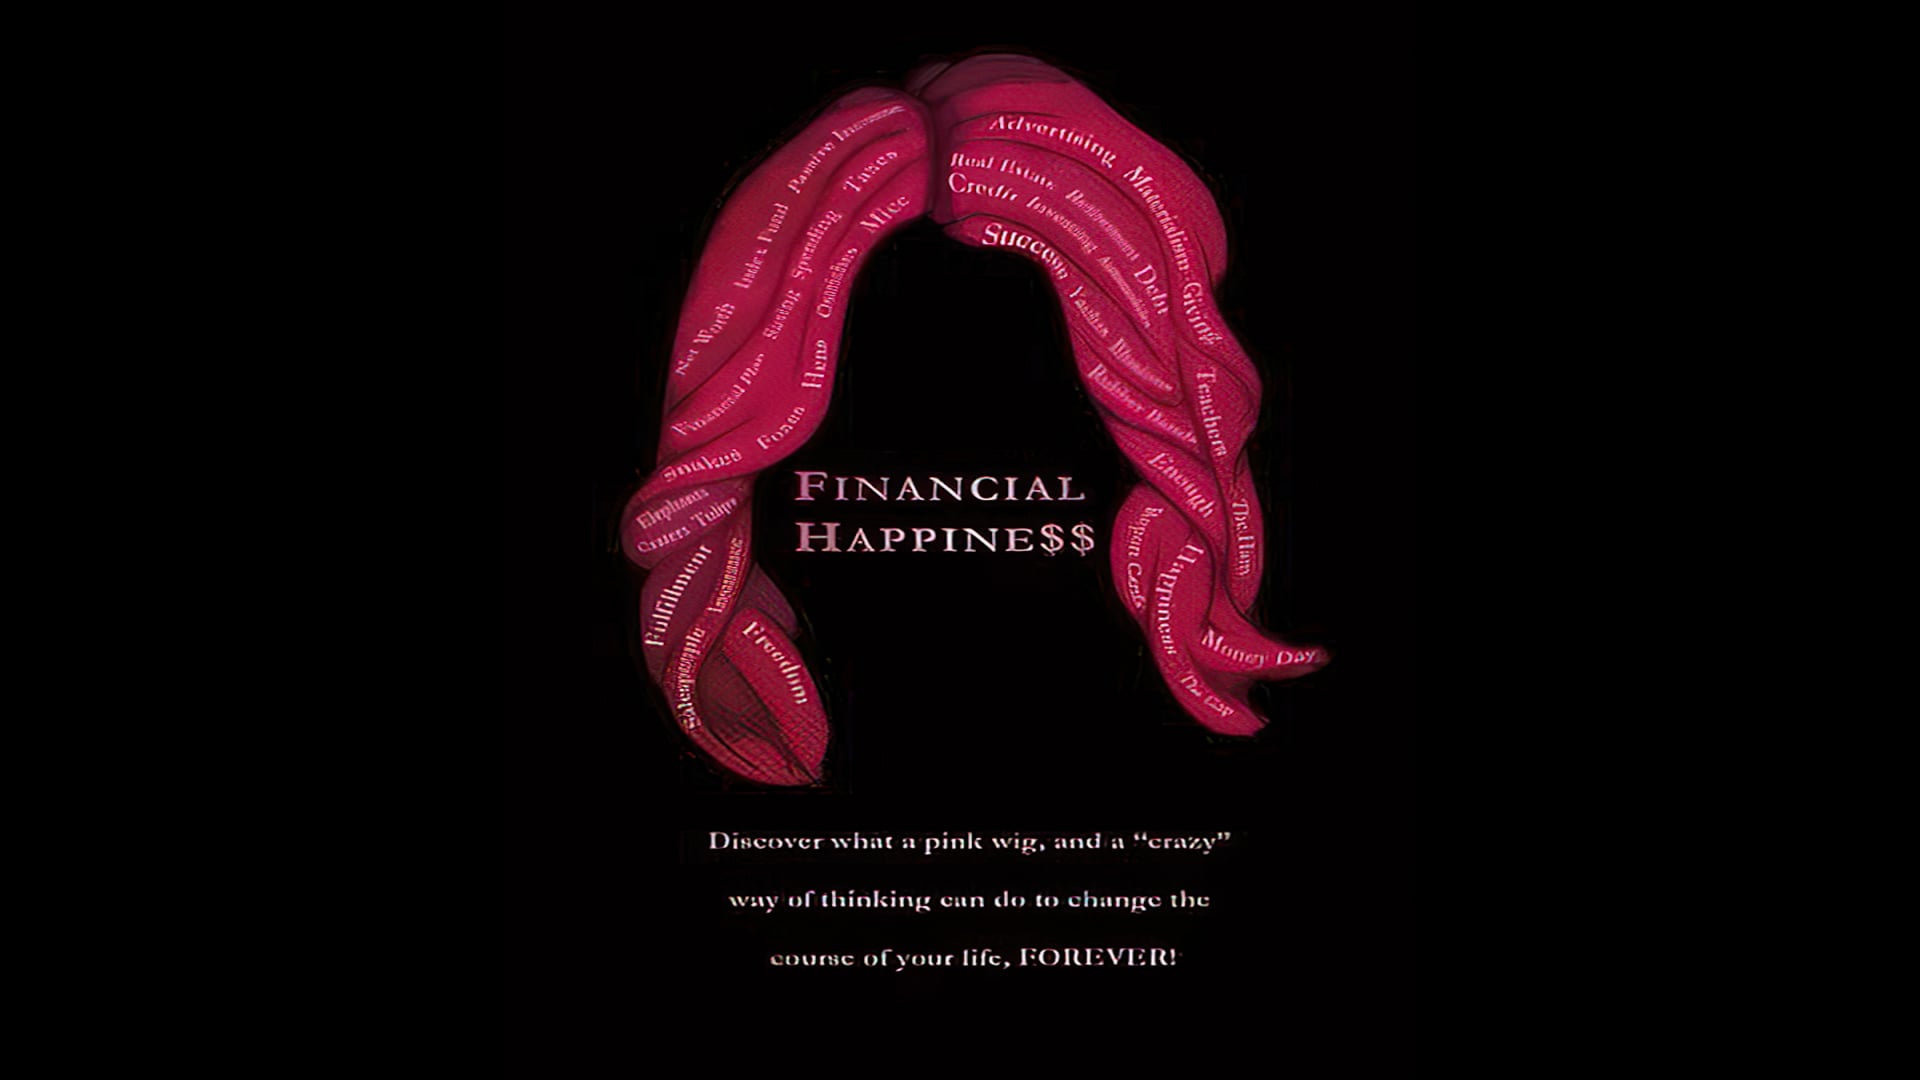 Financial Happiness Audiobook Promo.mpg